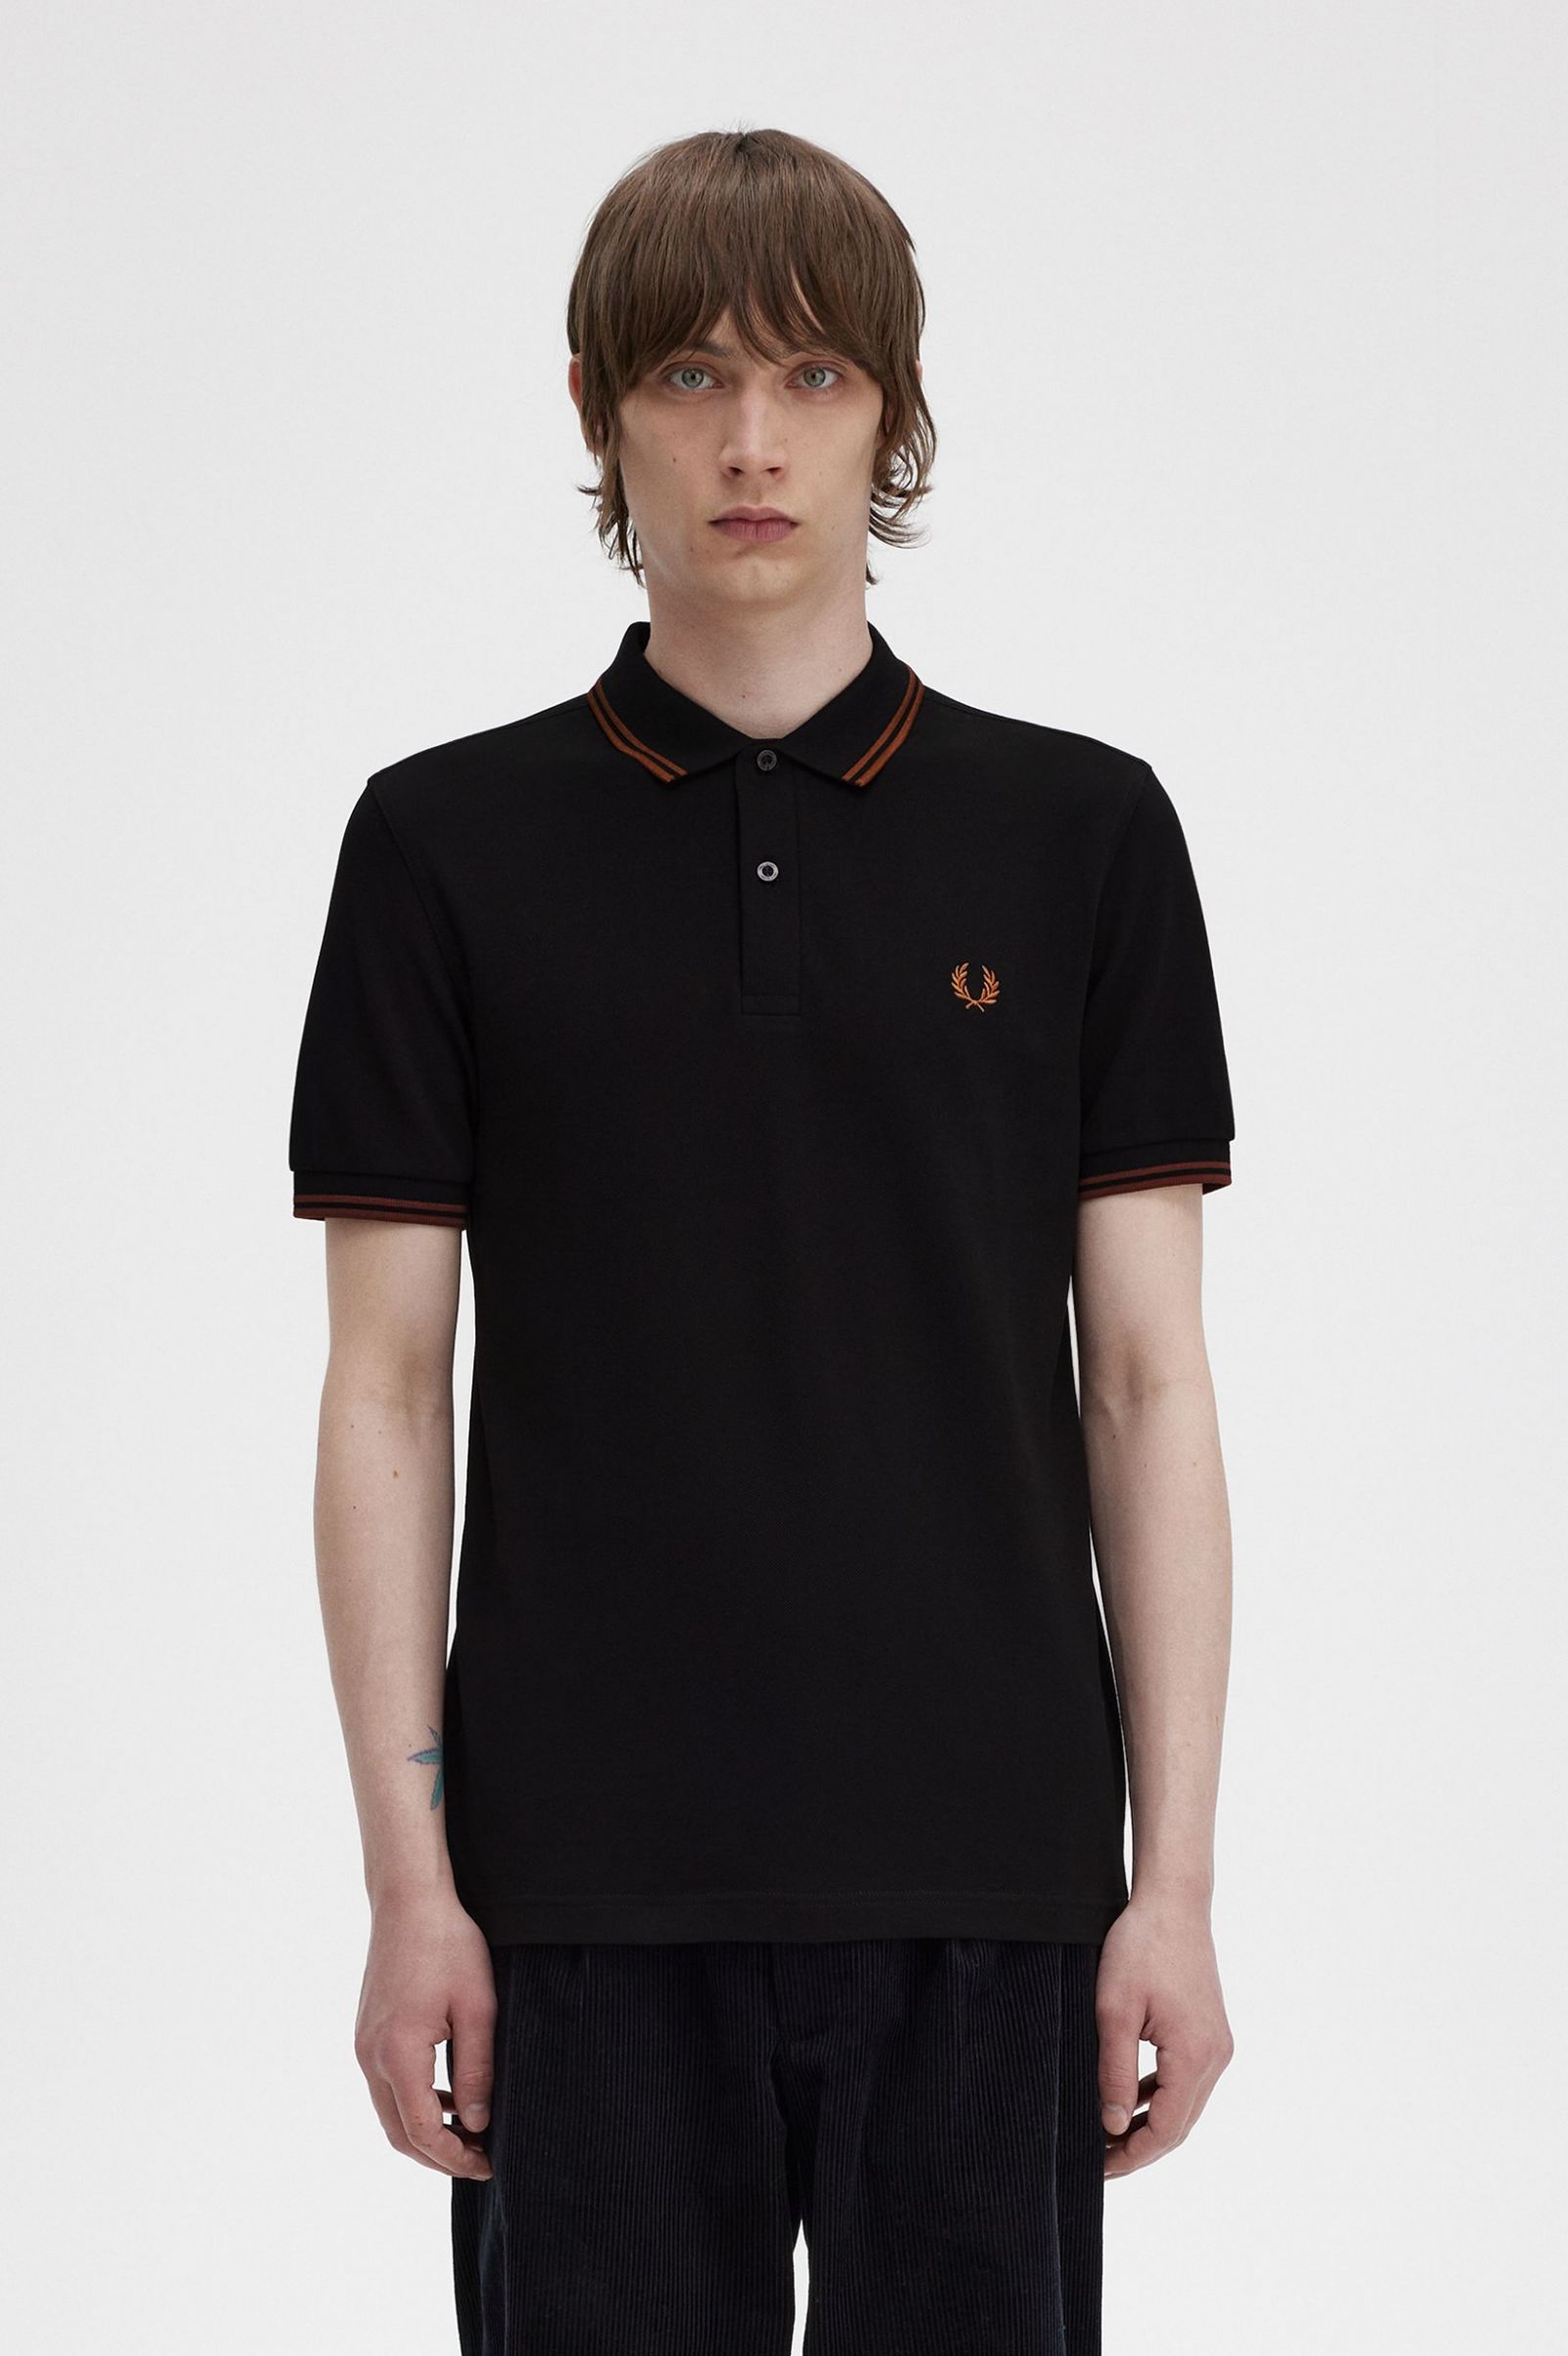 Twin Twipped Fred Perry Shirt in Black 